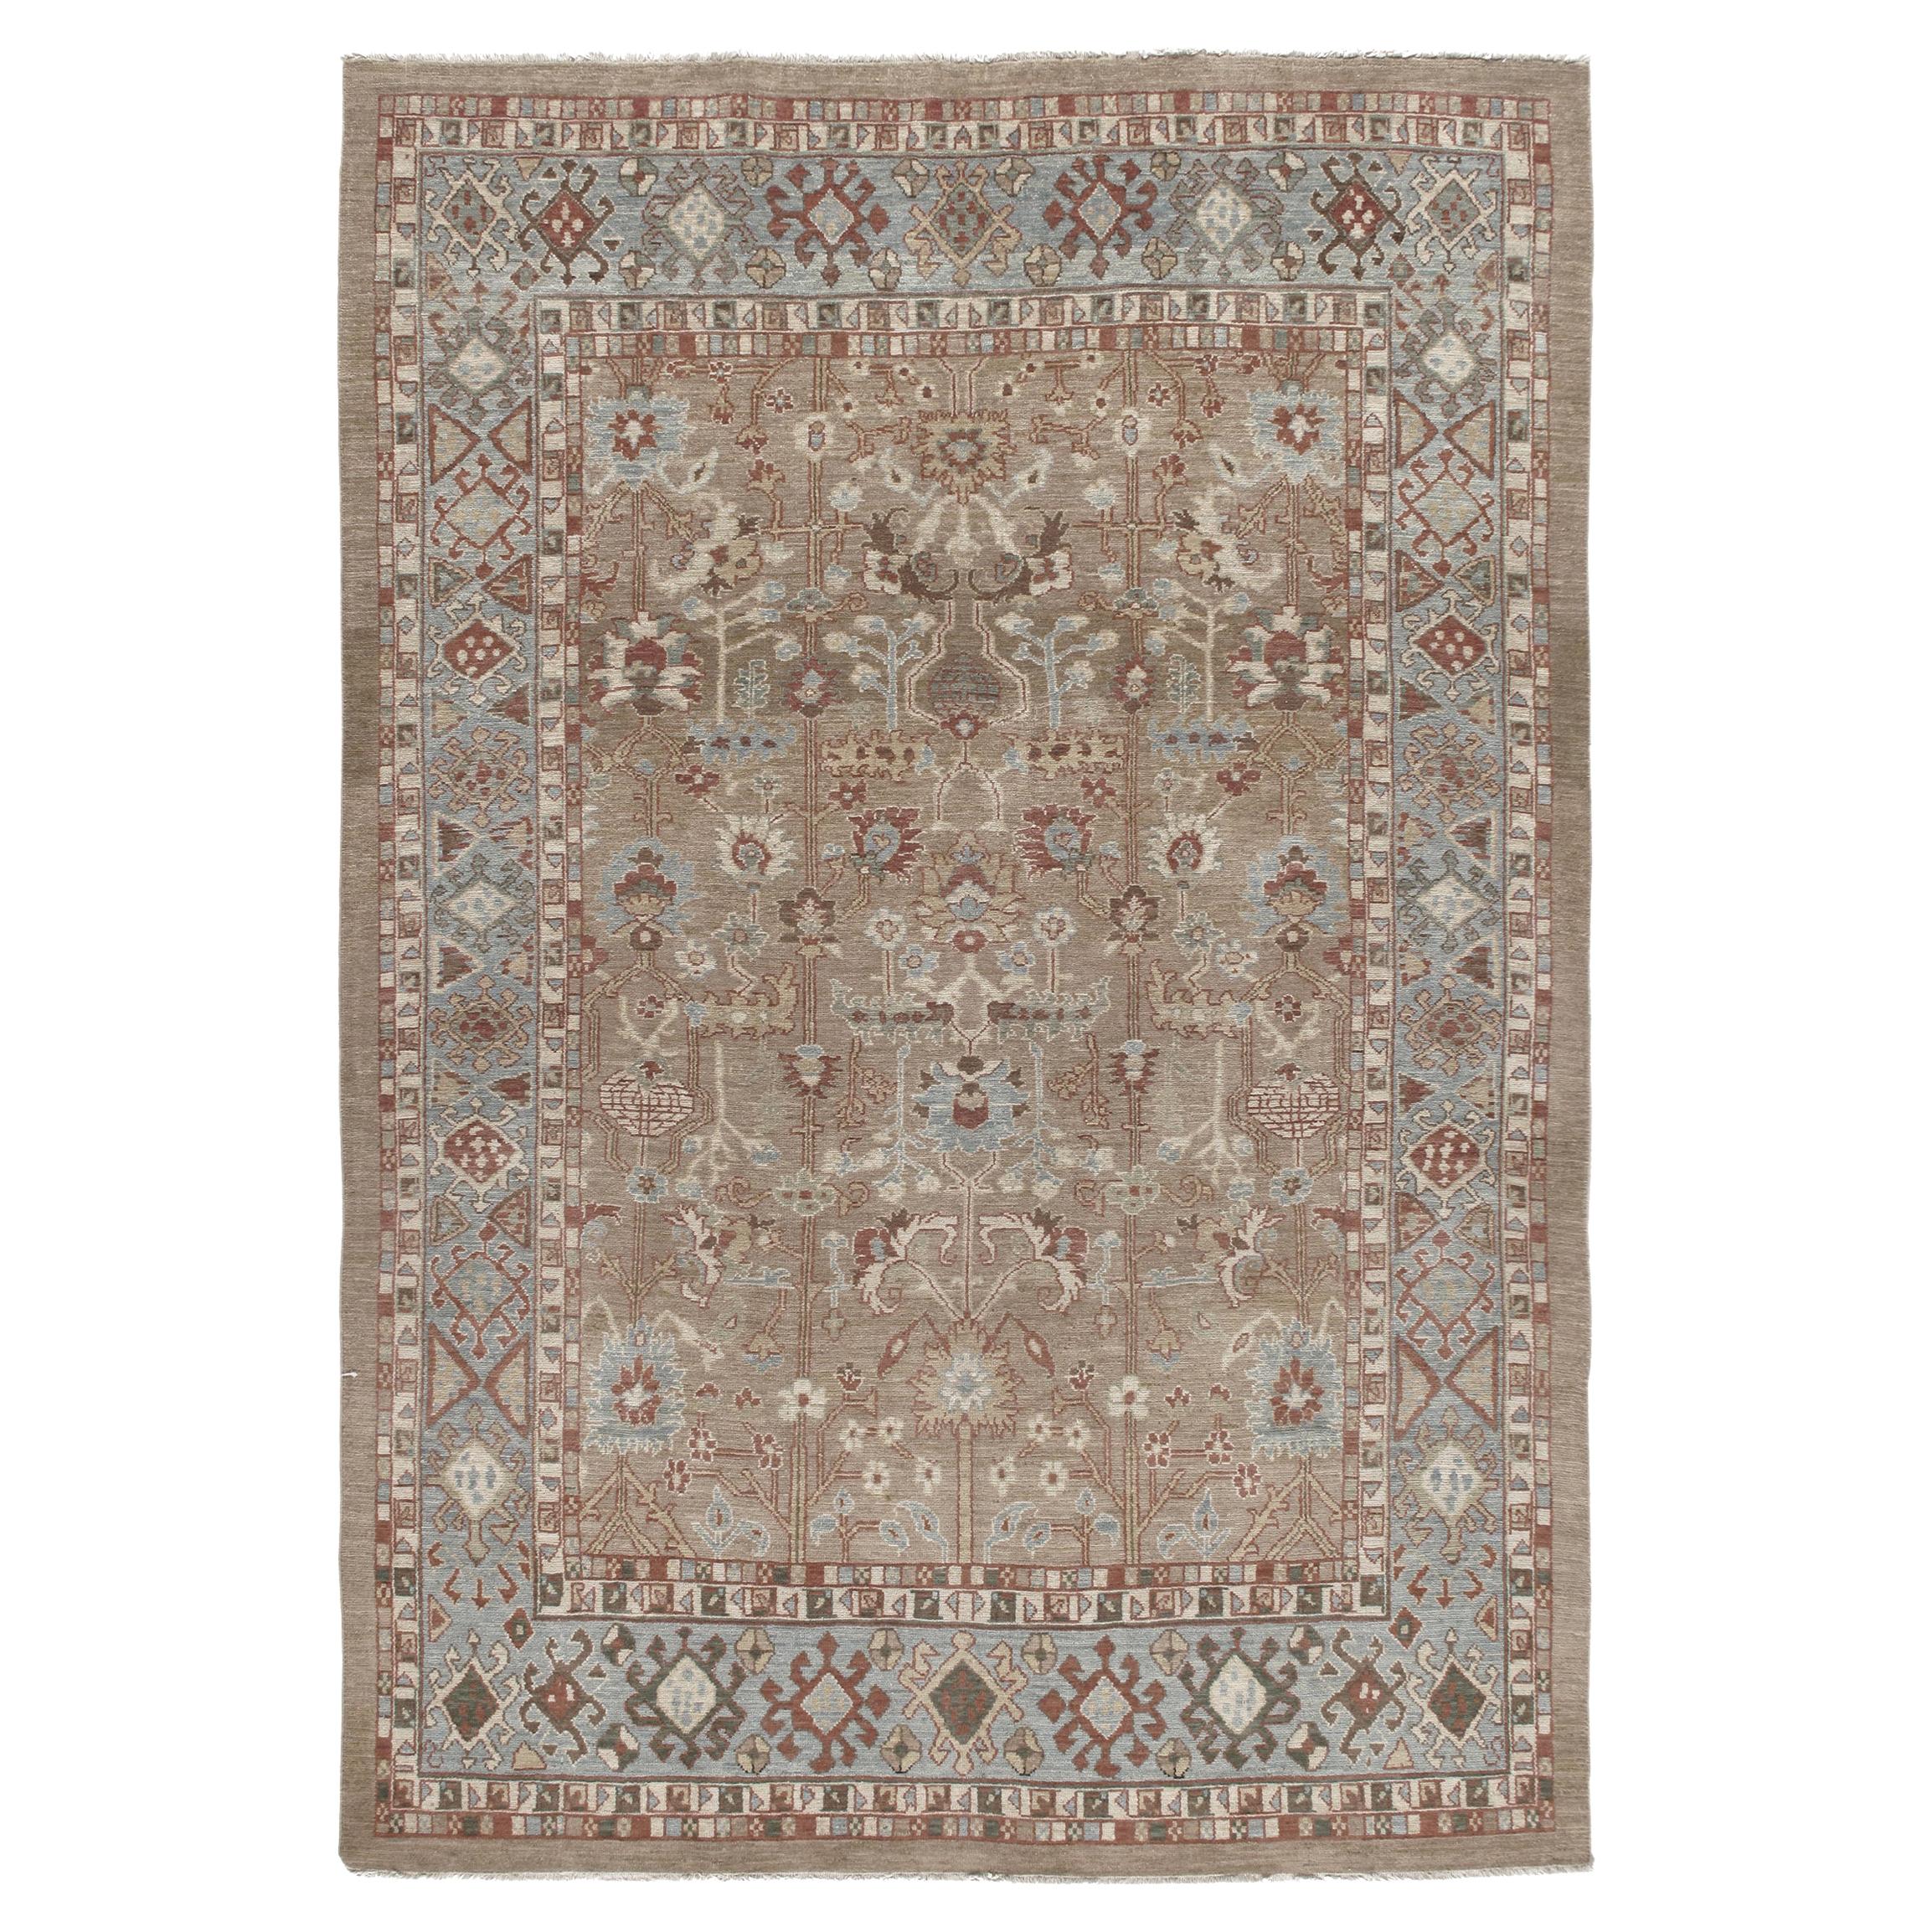 Persian Traditional Kurdish Handknotted Rug in Camel, Pale Blue and Rust Color